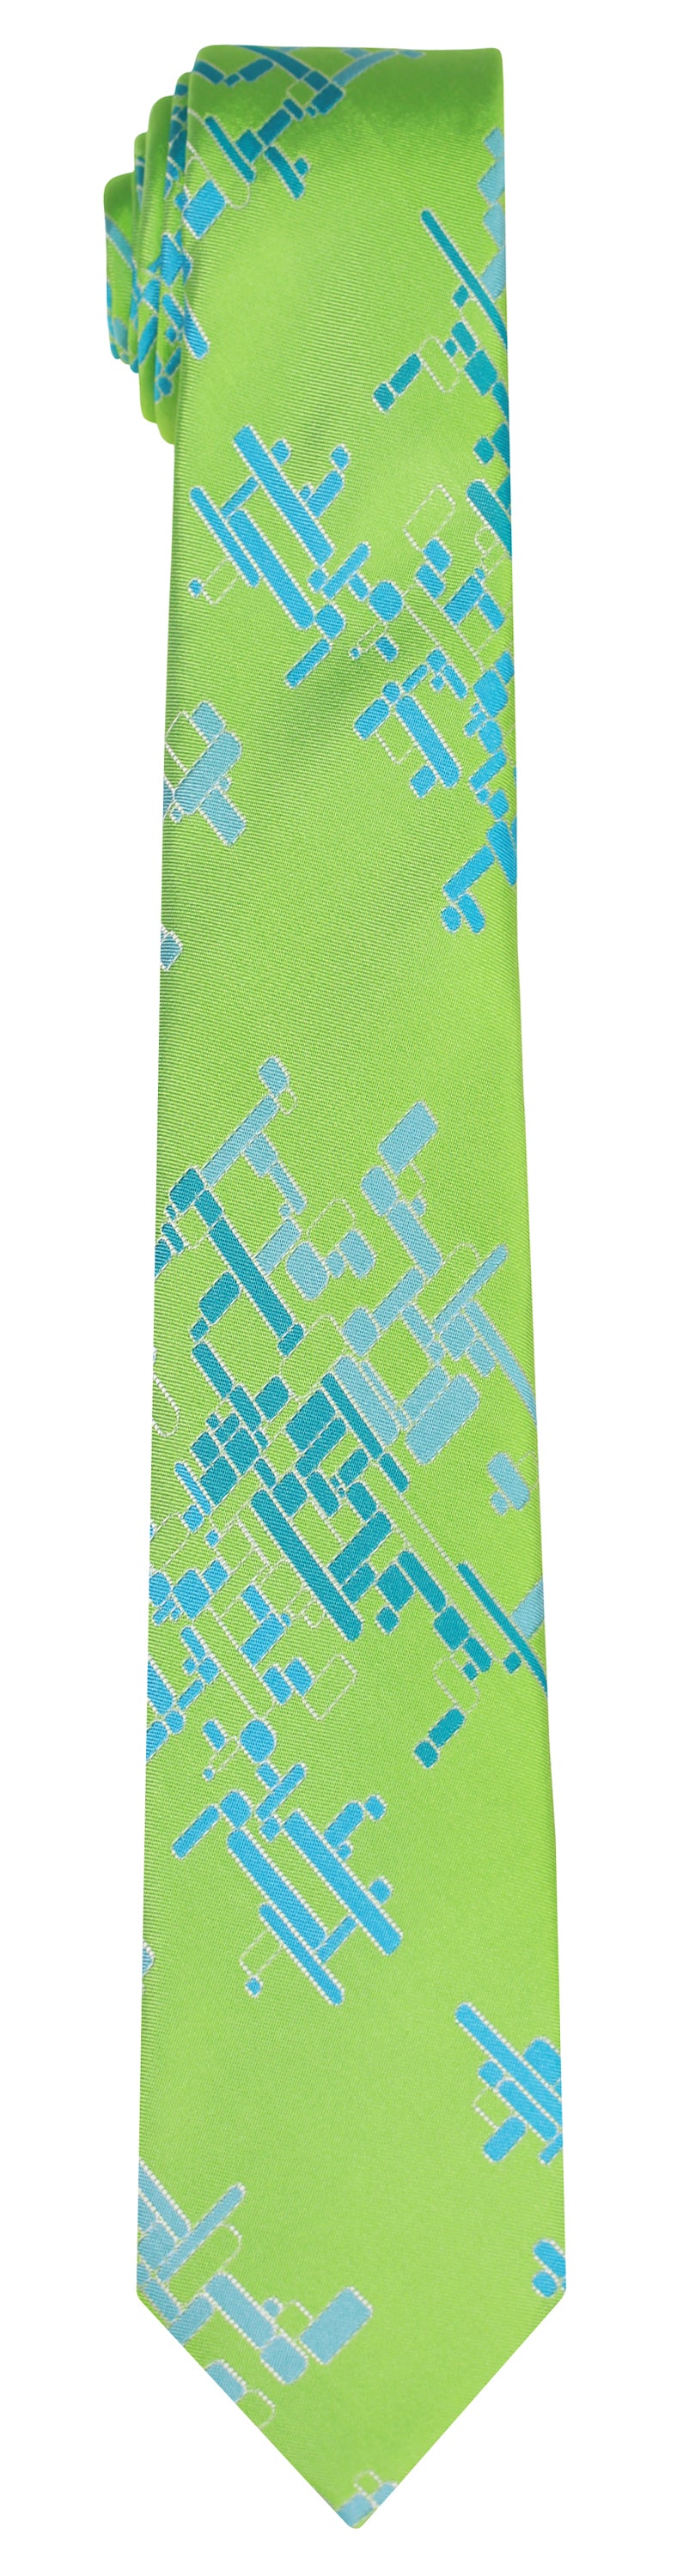 Mimi Fong Cubes Tie in Green